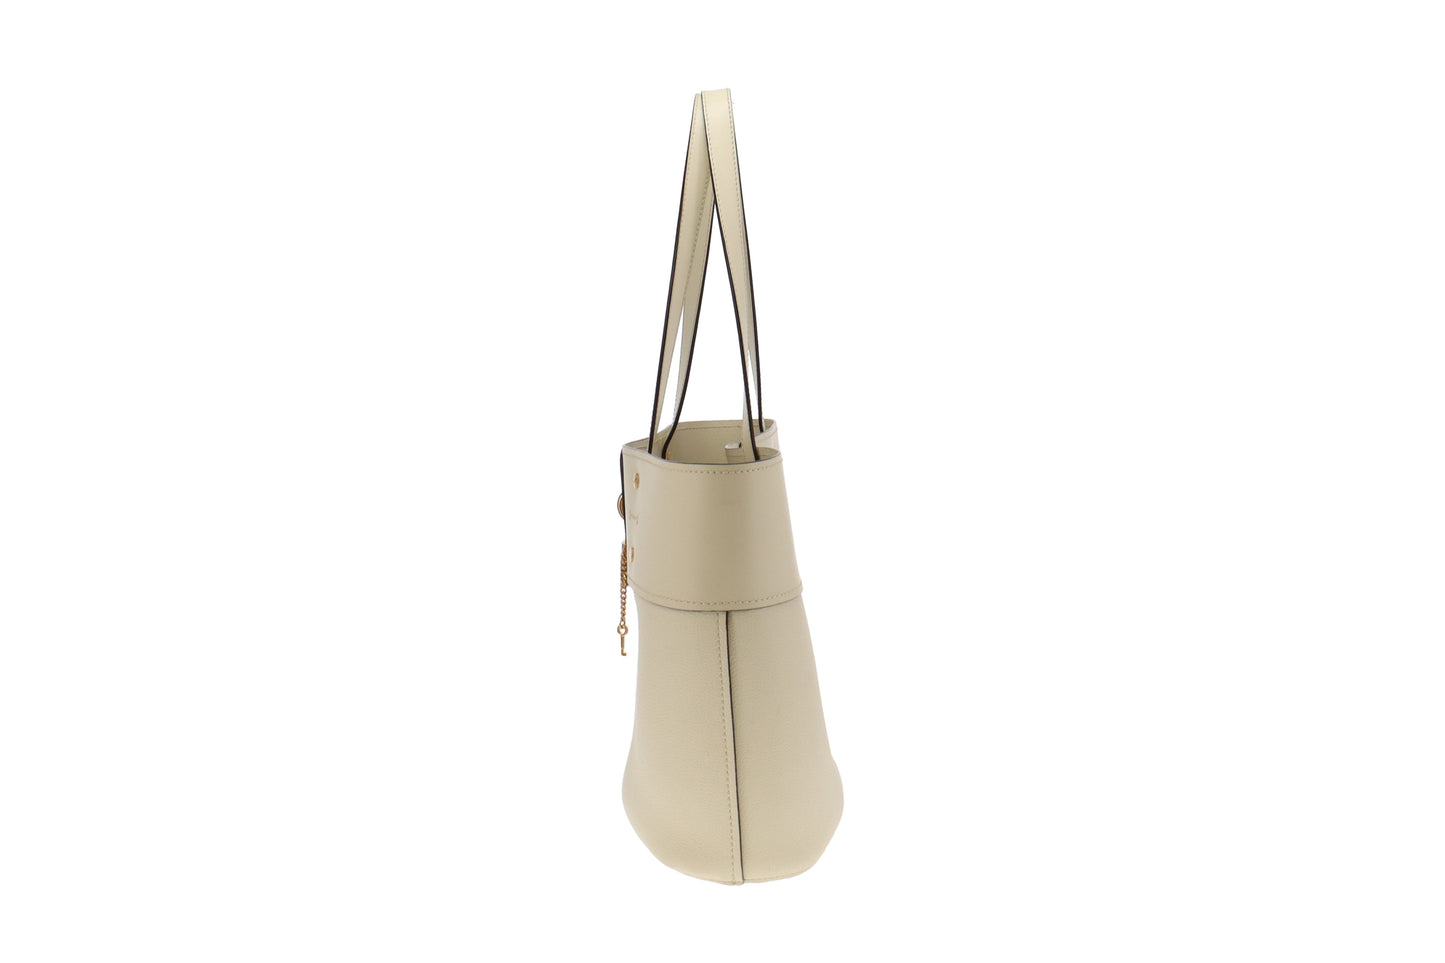 Chloe Cream Smooth and Grained Leather Medium Aby Tote